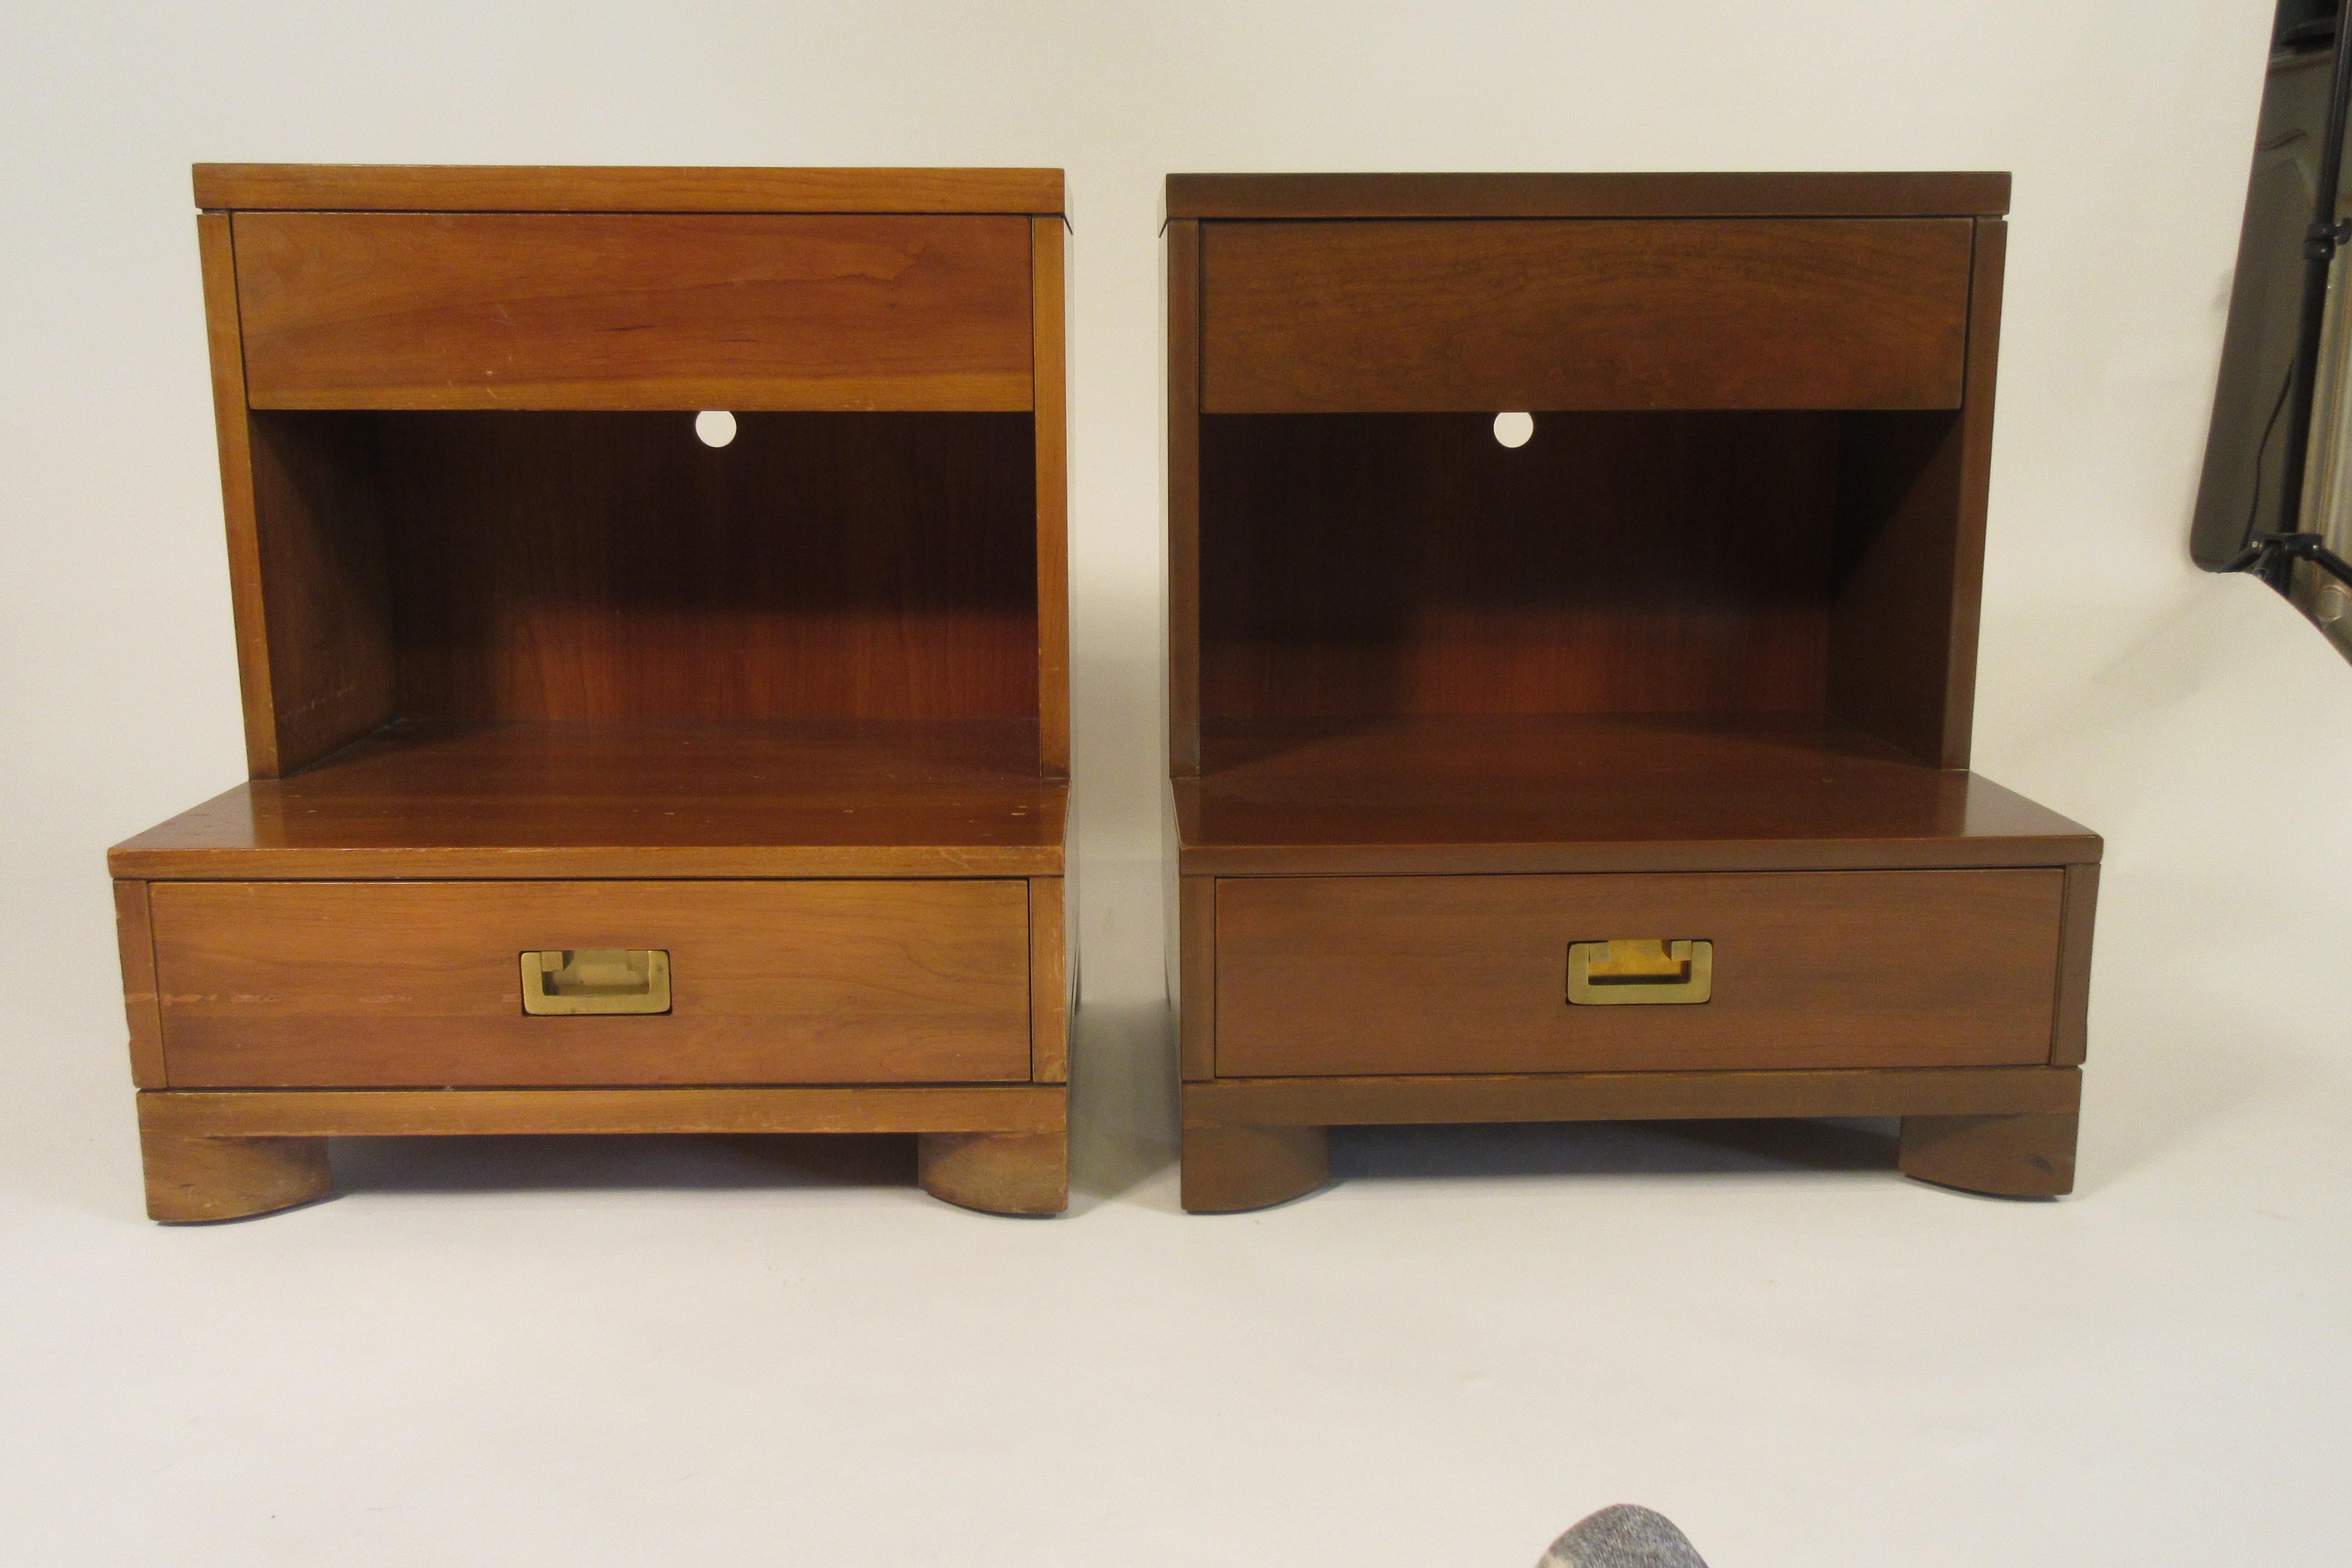 Pair of 1950s Widdicomb end tables (night stands). Brass hardware. Needs refinishing. There was a hole cut in the back of each back board.